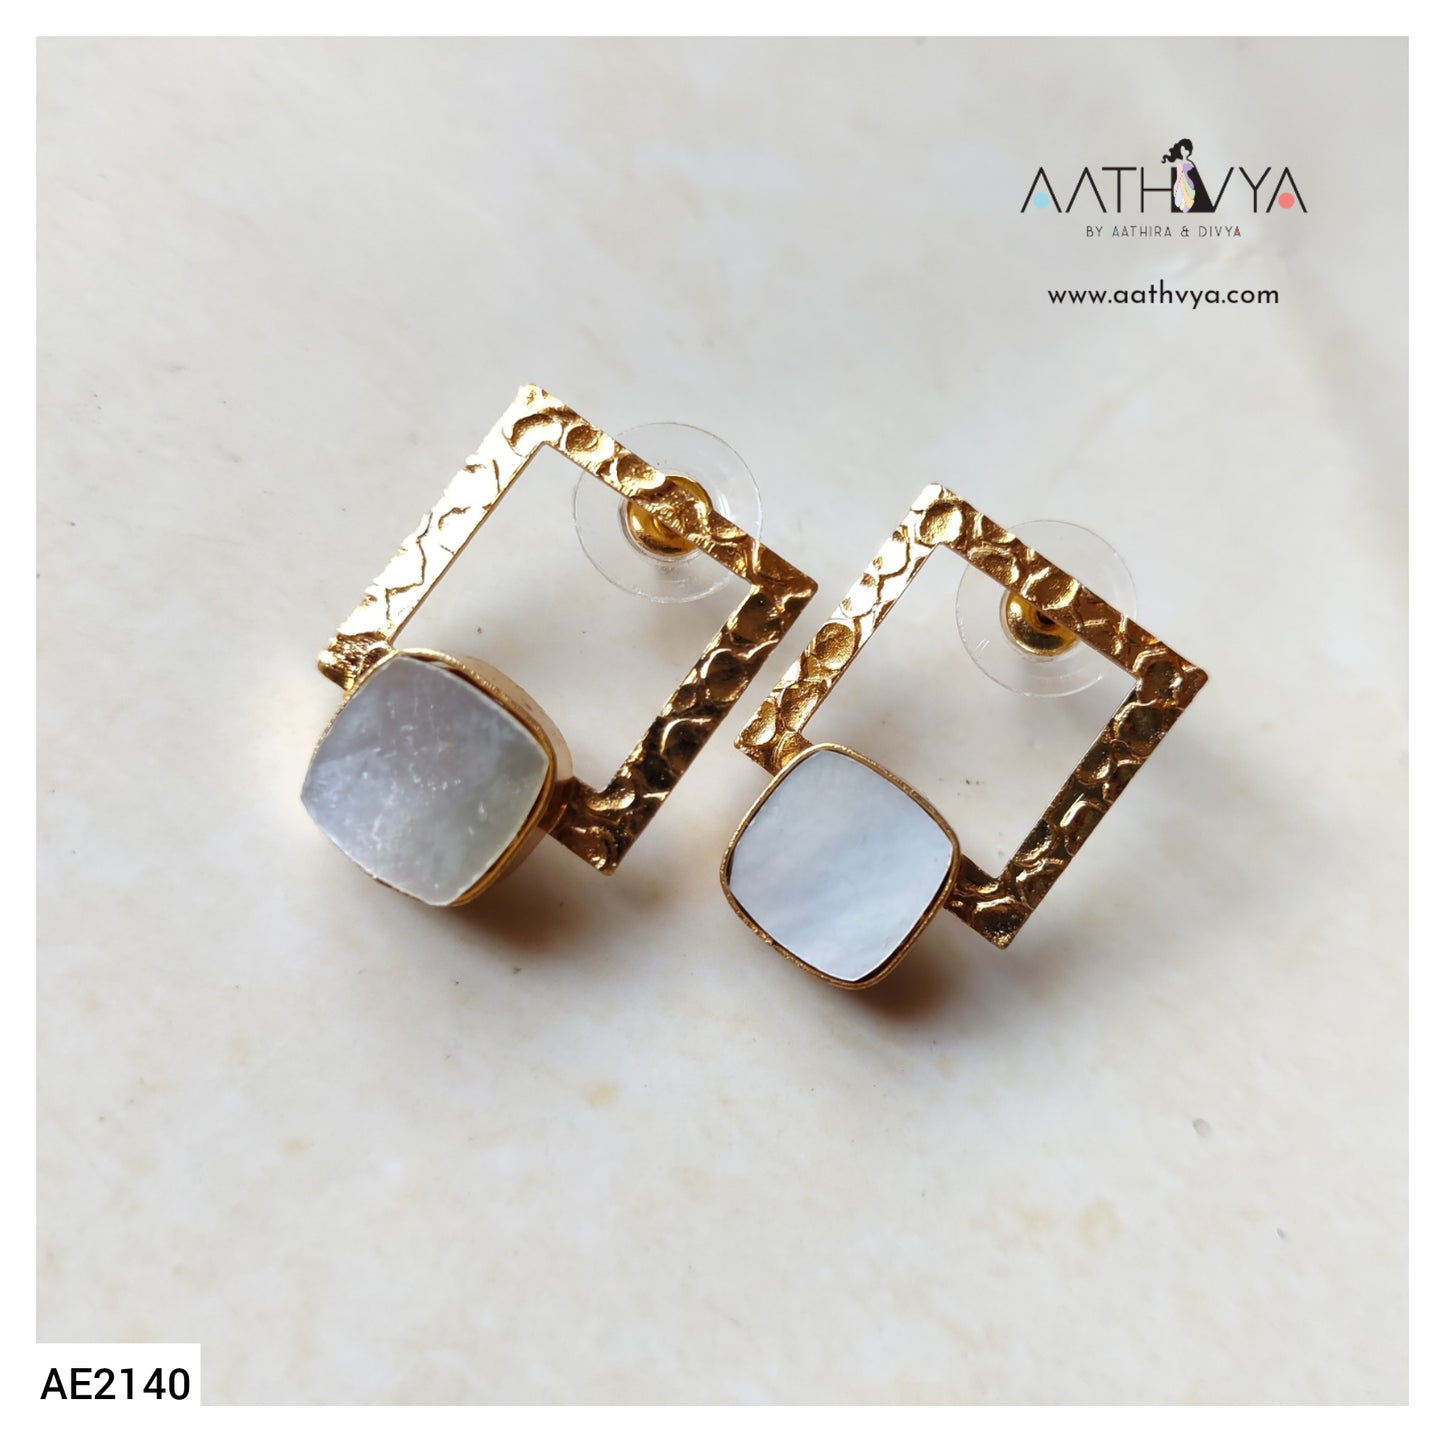 MOTHER OF PEARL SQUARE EARRINGS - AE2140